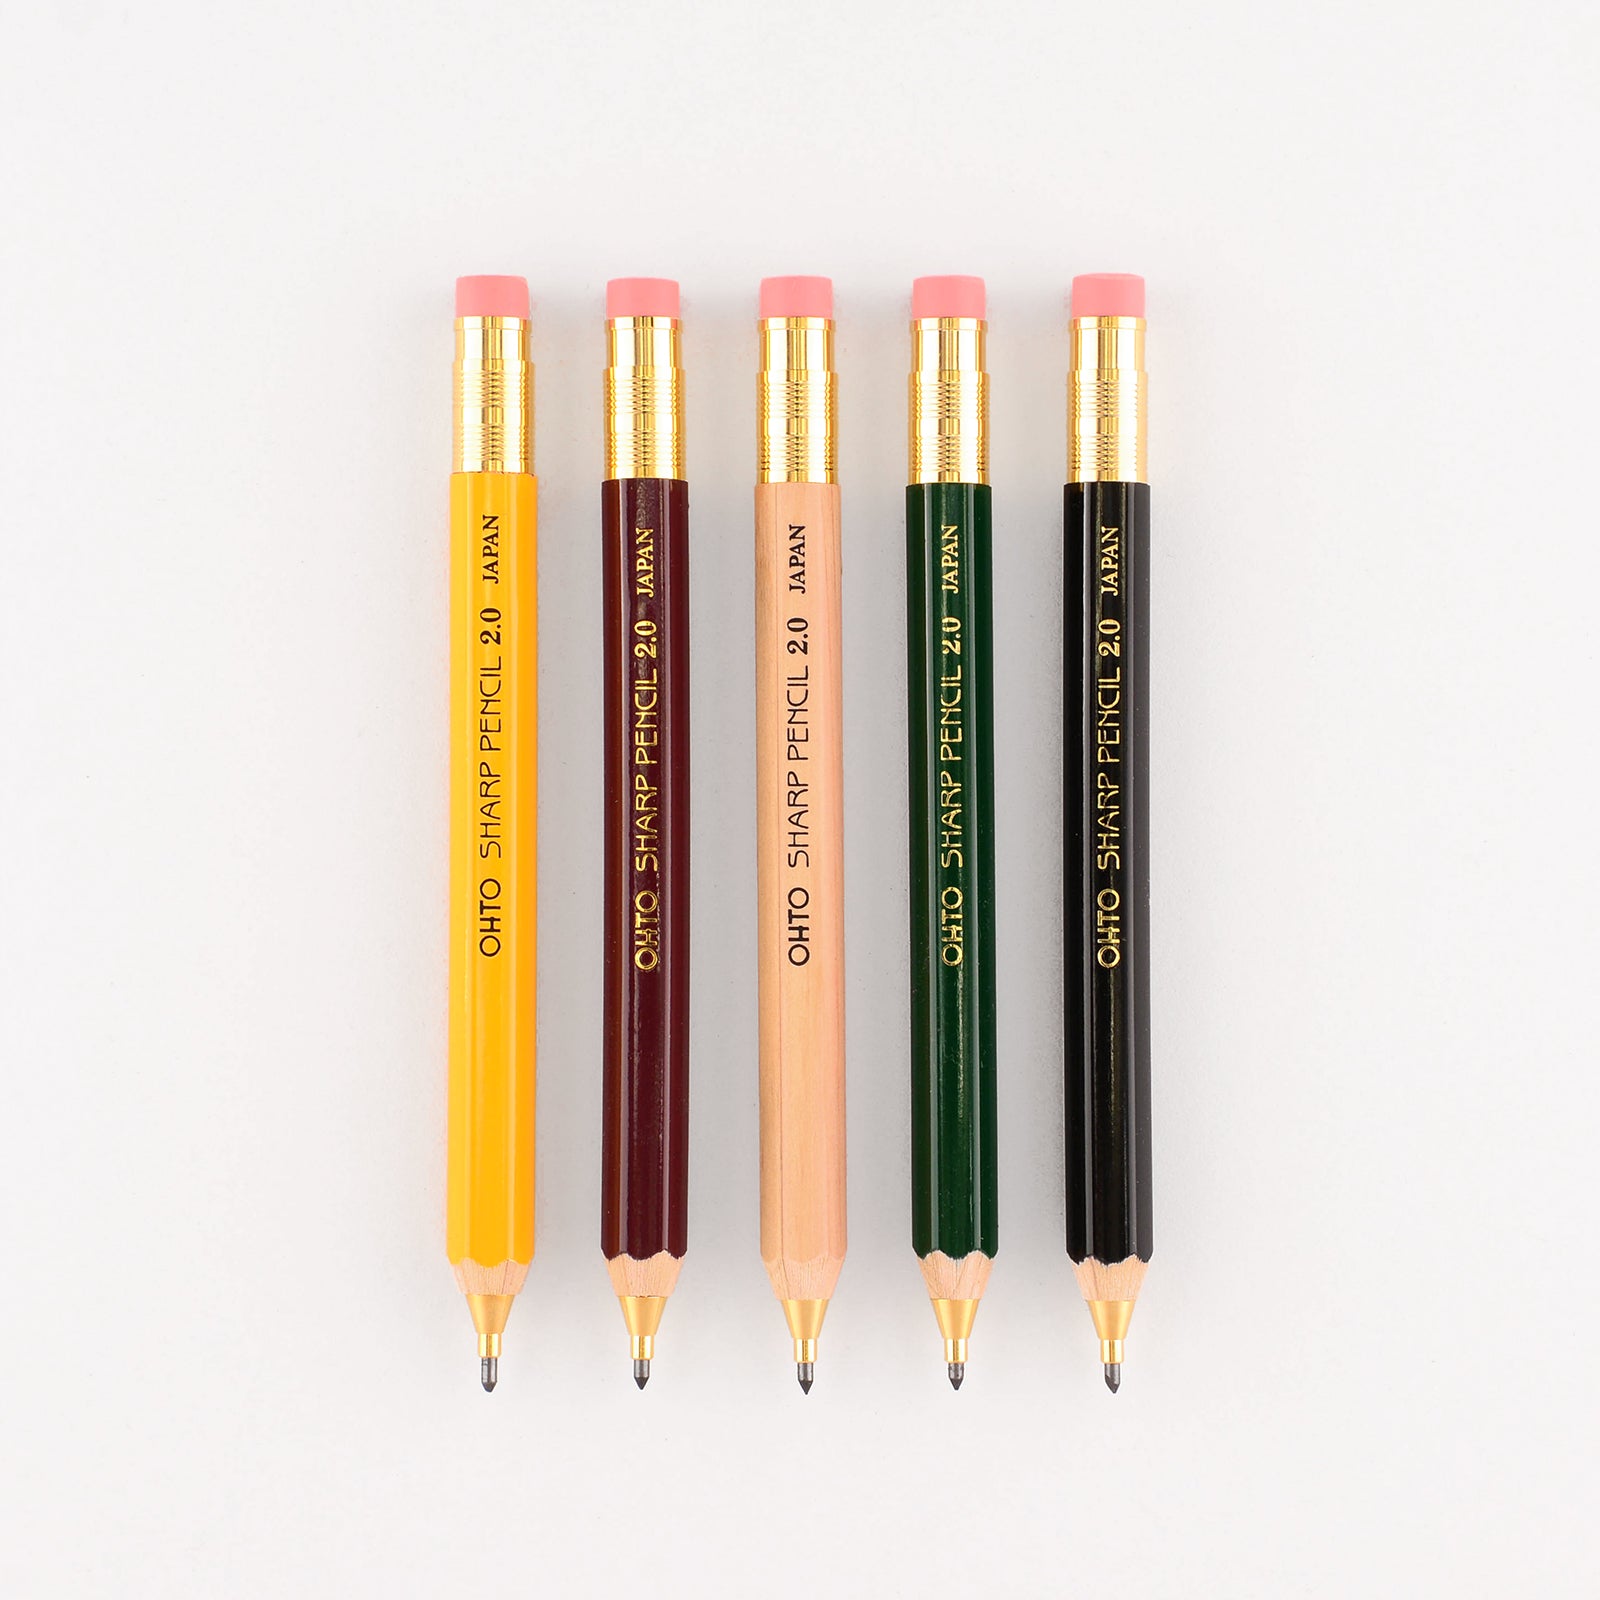 OHTO Mechanical Pencil Wood Sharp Pencil with Eraser 2.0 mm 